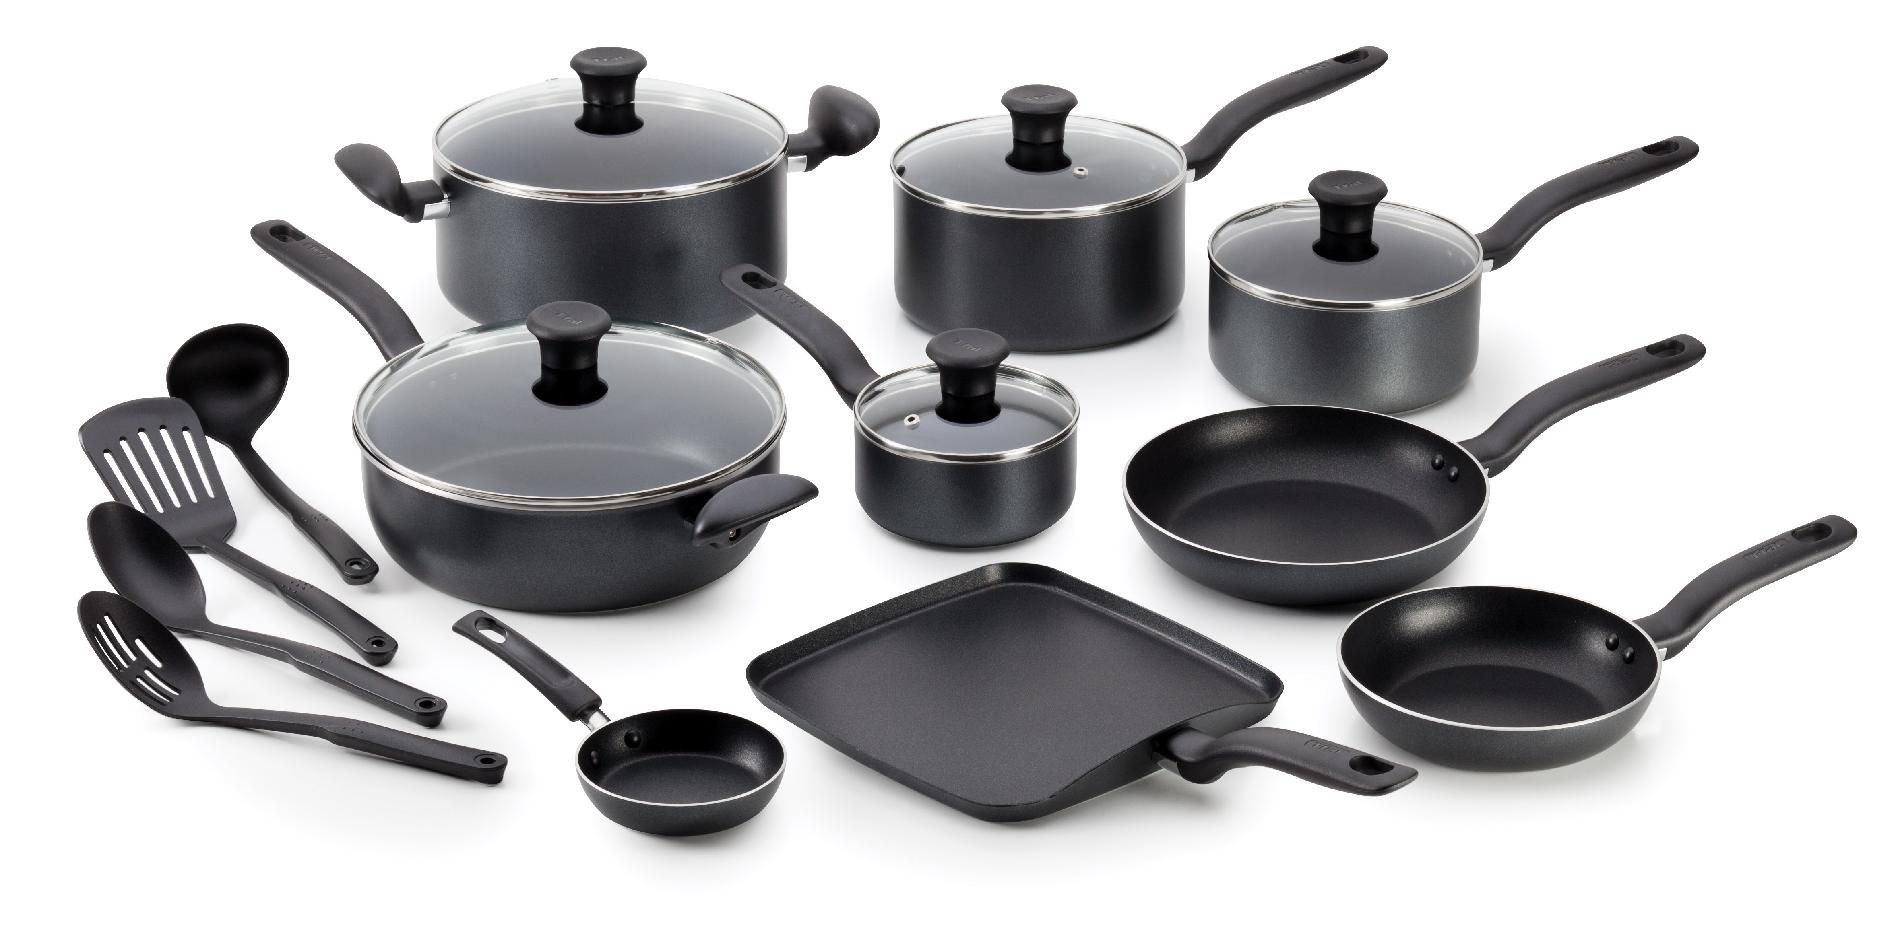 T fal Initiatives 18 pc Nonstick Inside and Out Cookware Set 